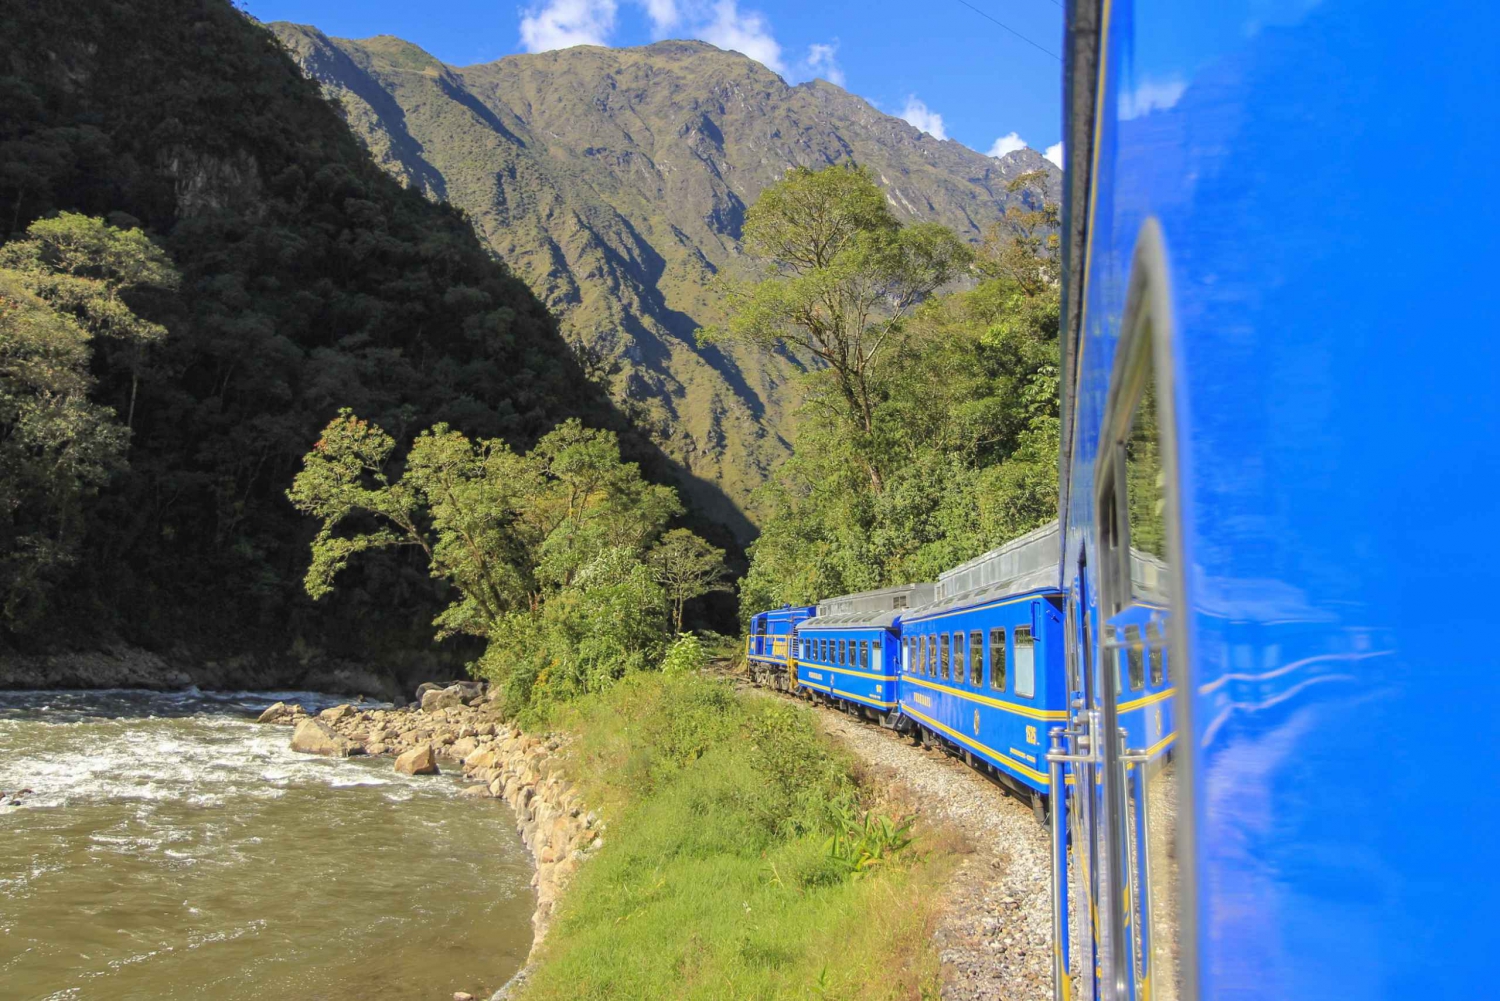 Machu Picchu: Full-Day Tour from Cusco with Optional Lunch